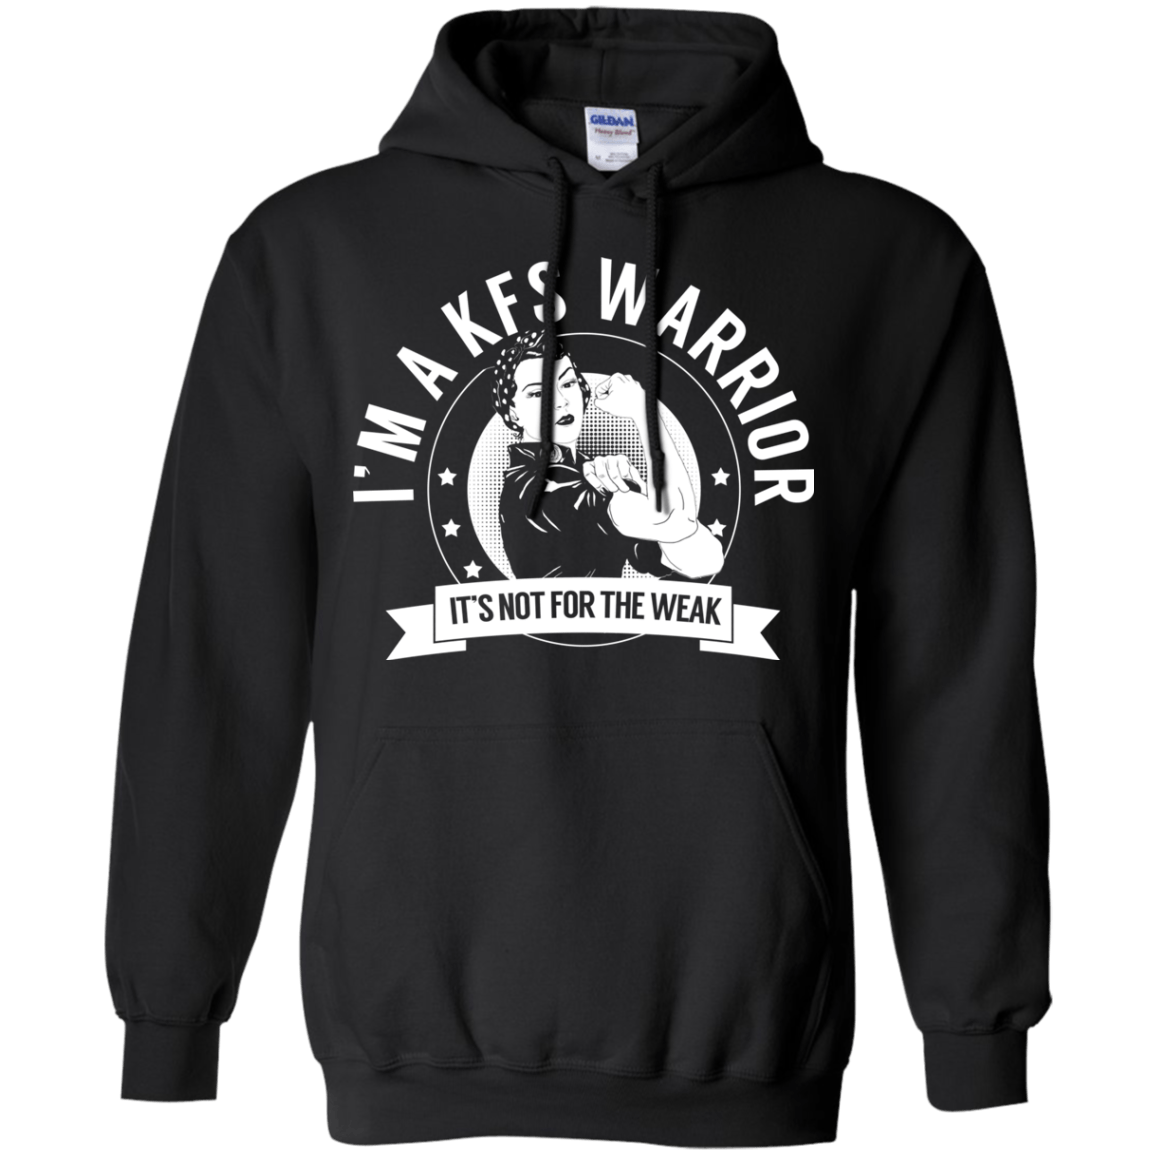 Klippel-Feil Syndrome - KFS Warrior Not For The Weak Pullover Hoodie 8 oz. - The Unchargeables